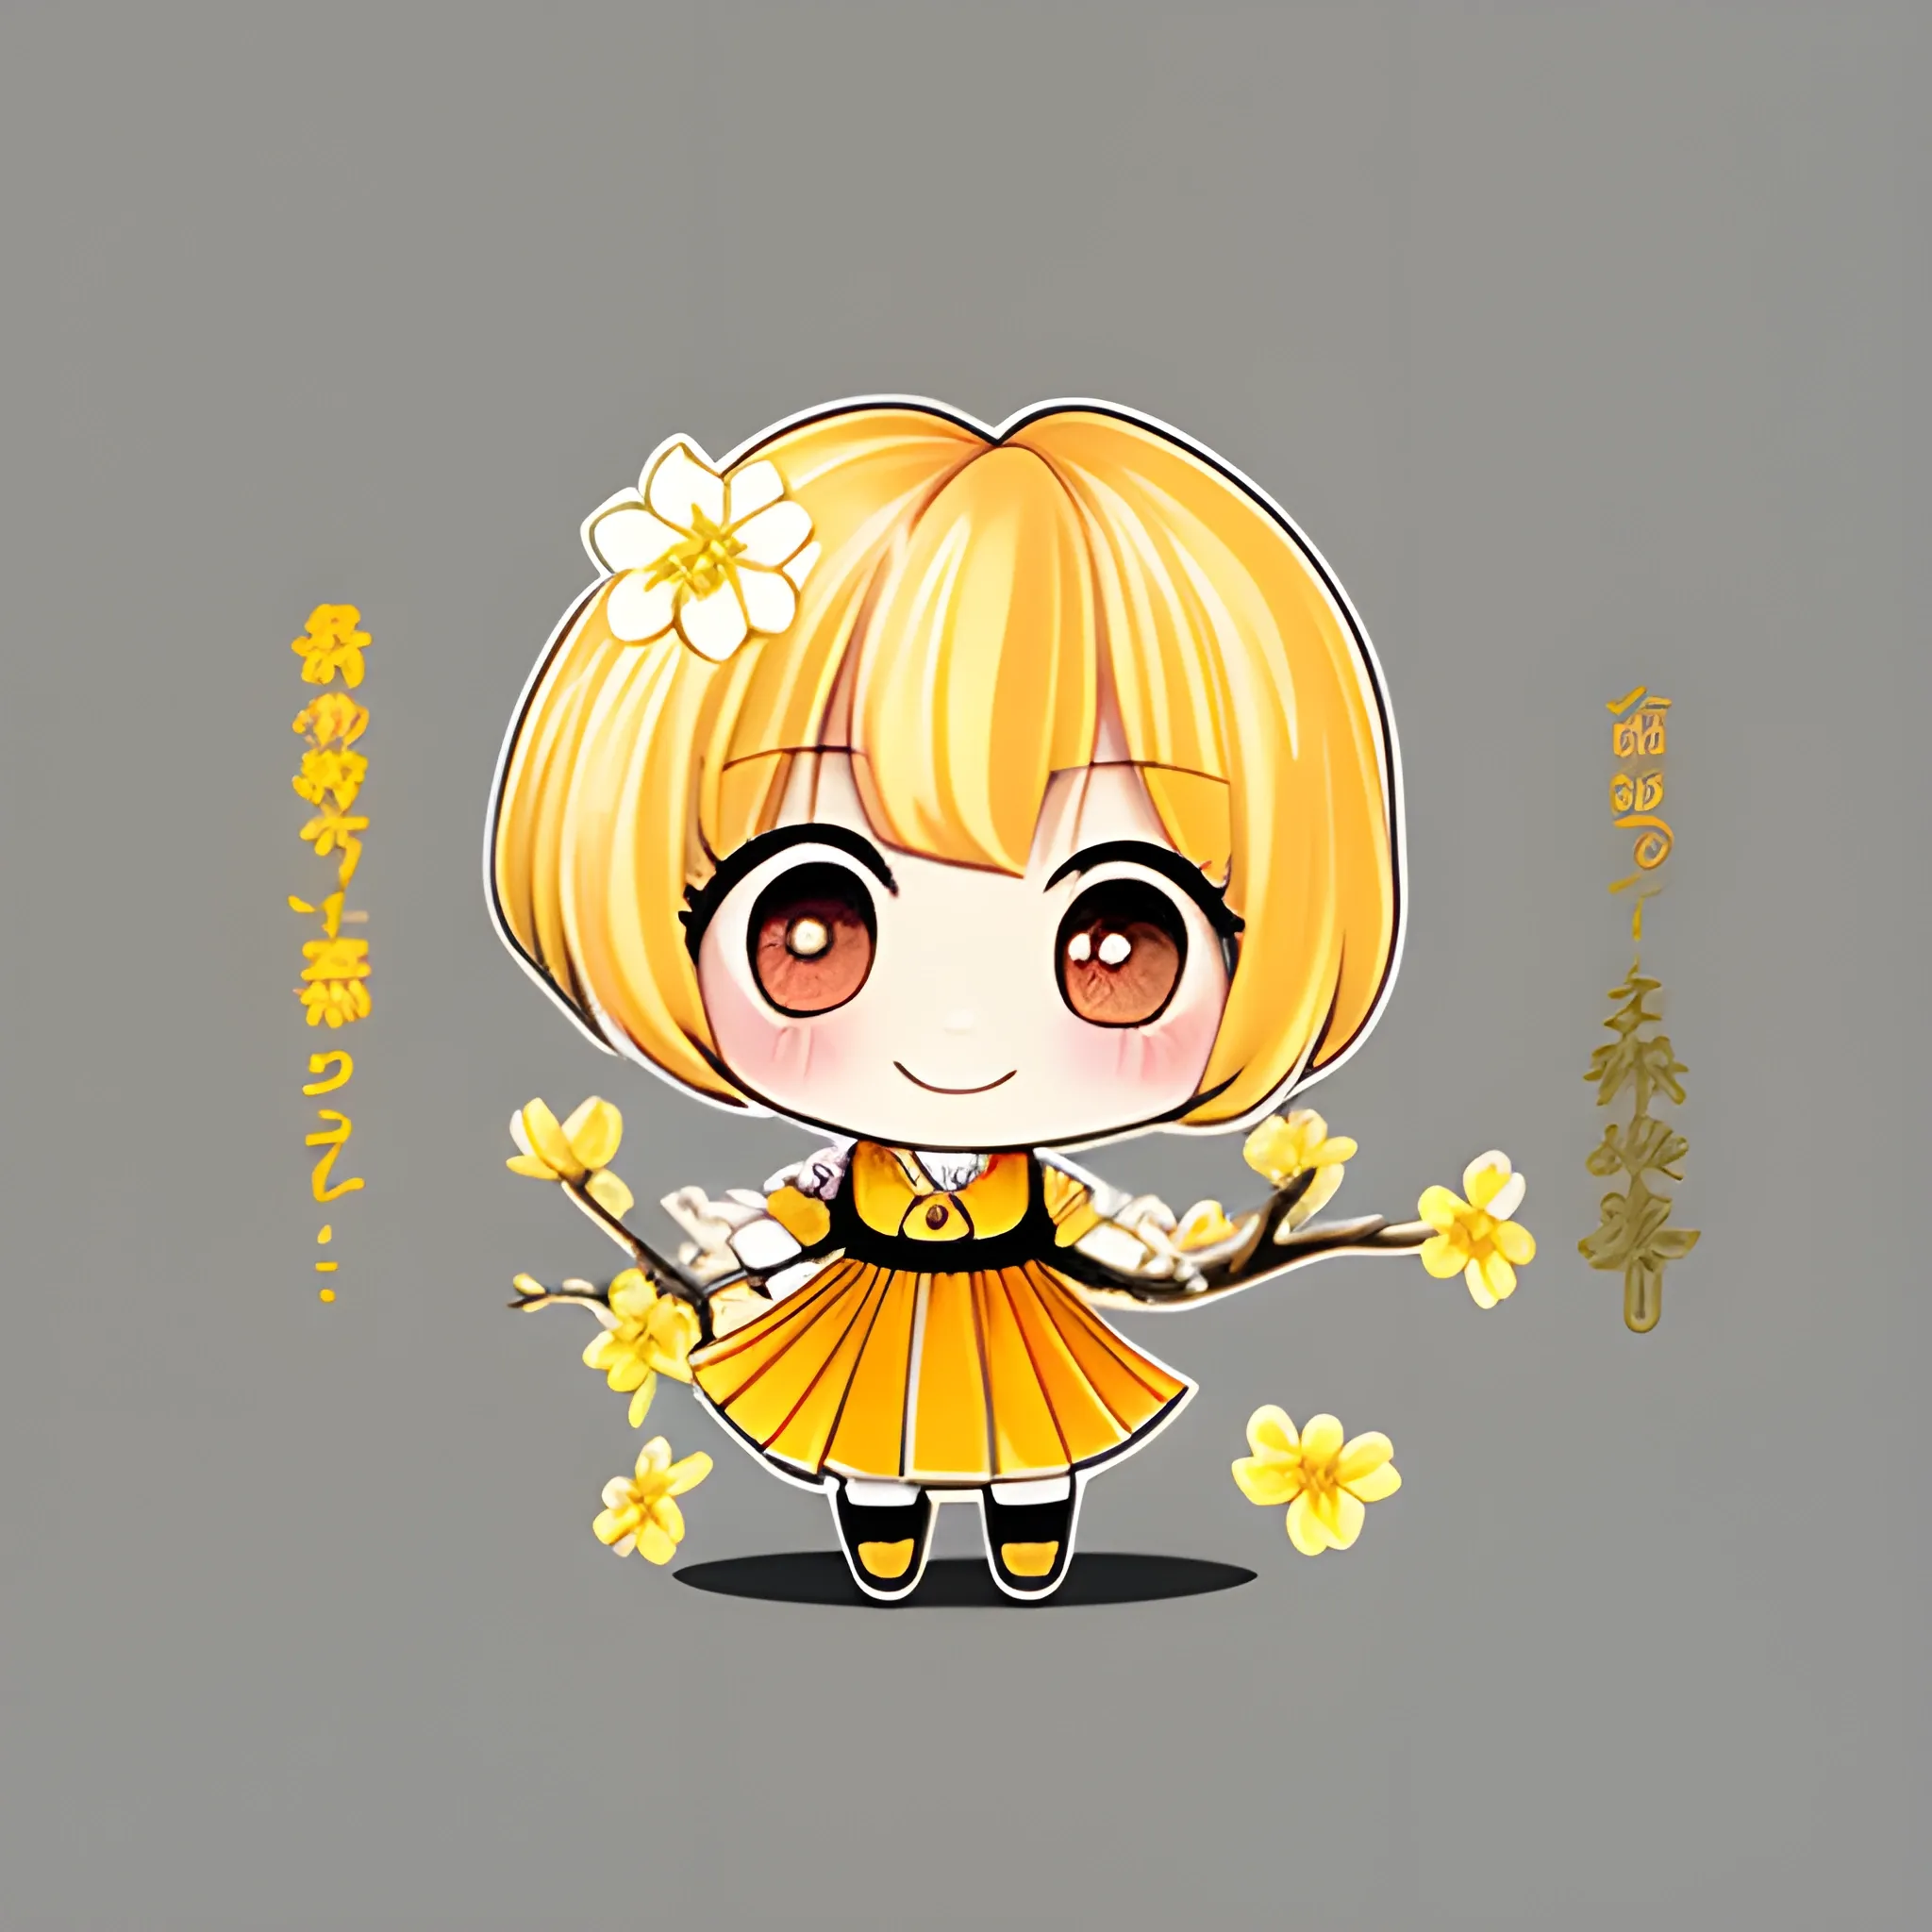 a yellow apricot blossom in the style of chibi

